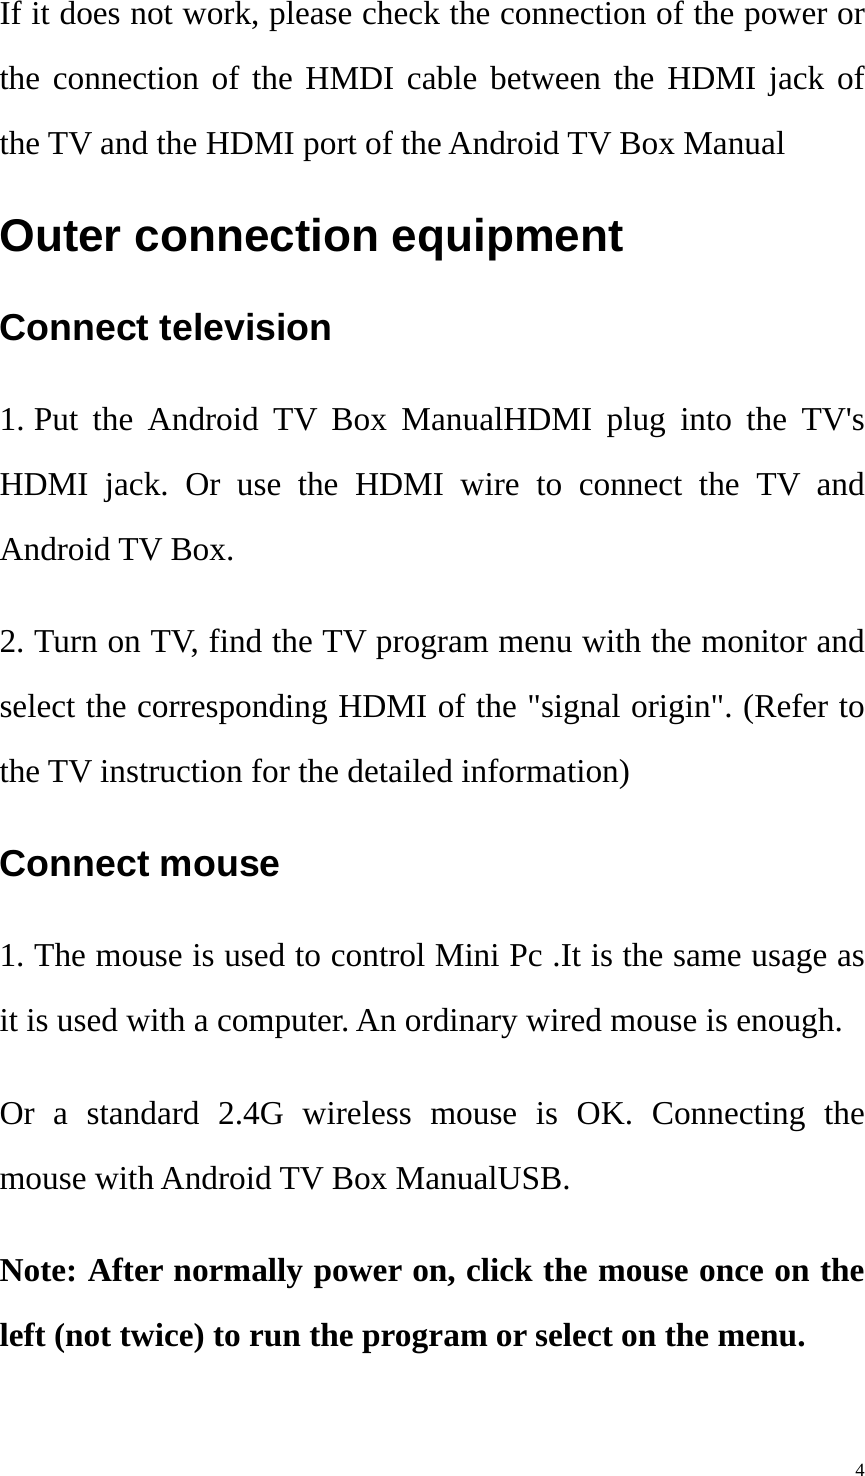    4If it does not work, please check the connection of the power or the connection of the HMDI cable between the HDMI jack of the TV and the HDMI port of the Android TV Box Manual Outer connection equipment   Connect television   1. Put the Android TV Box ManualHDMI plug into the TV&apos;s HDMI jack. Or use the HDMI wire to connect the TV and Android TV Box. 2. Turn on TV, find the TV program menu with the monitor and select the corresponding HDMI of the &quot;signal origin&quot;. (Refer to the TV instruction for the detailed information) Connect mouse   1. The mouse is used to control Mini Pc .It is the same usage as it is used with a computer. An ordinary wired mouse is enough.   Or a standard 2.4G wireless mouse is OK. Connecting the mouse with Android TV Box ManualUSB.     Note: After normally power on, click the mouse once on the left (not twice) to run the program or select on the menu.   